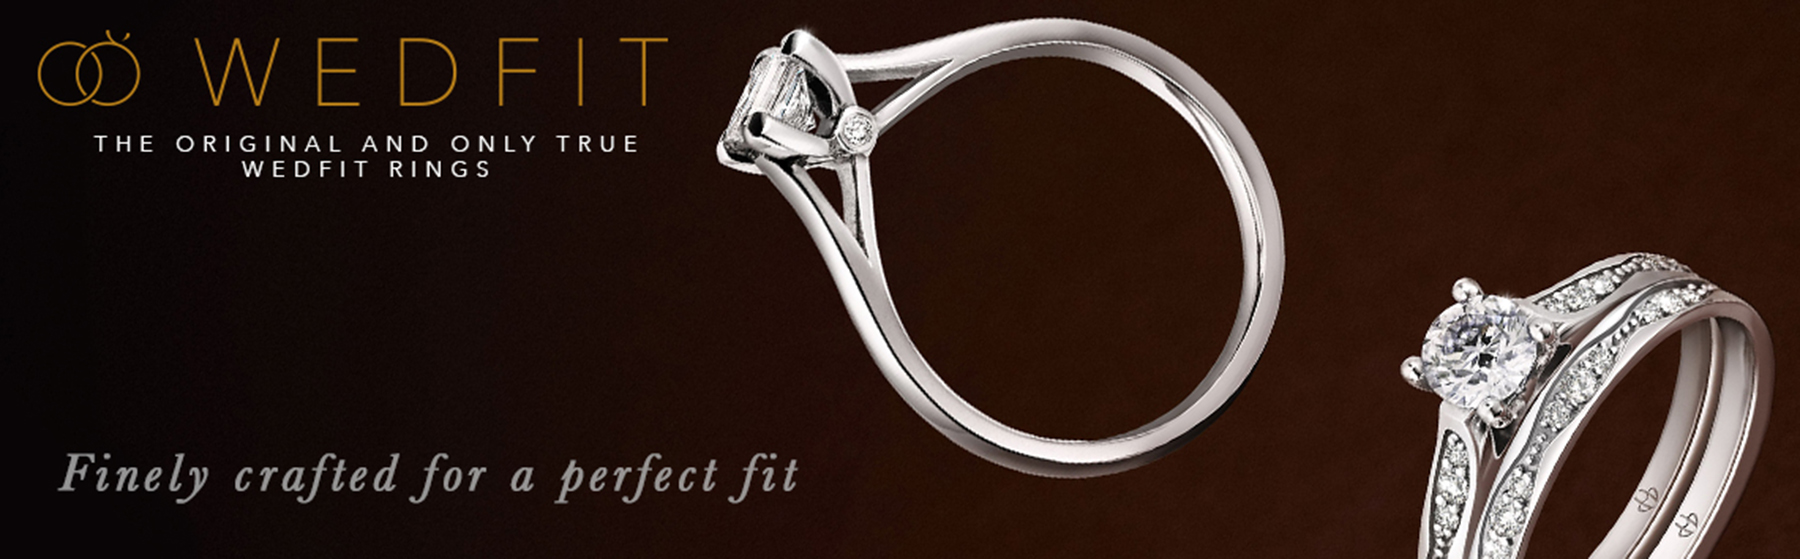 Wedfit rings, finely crafted with care